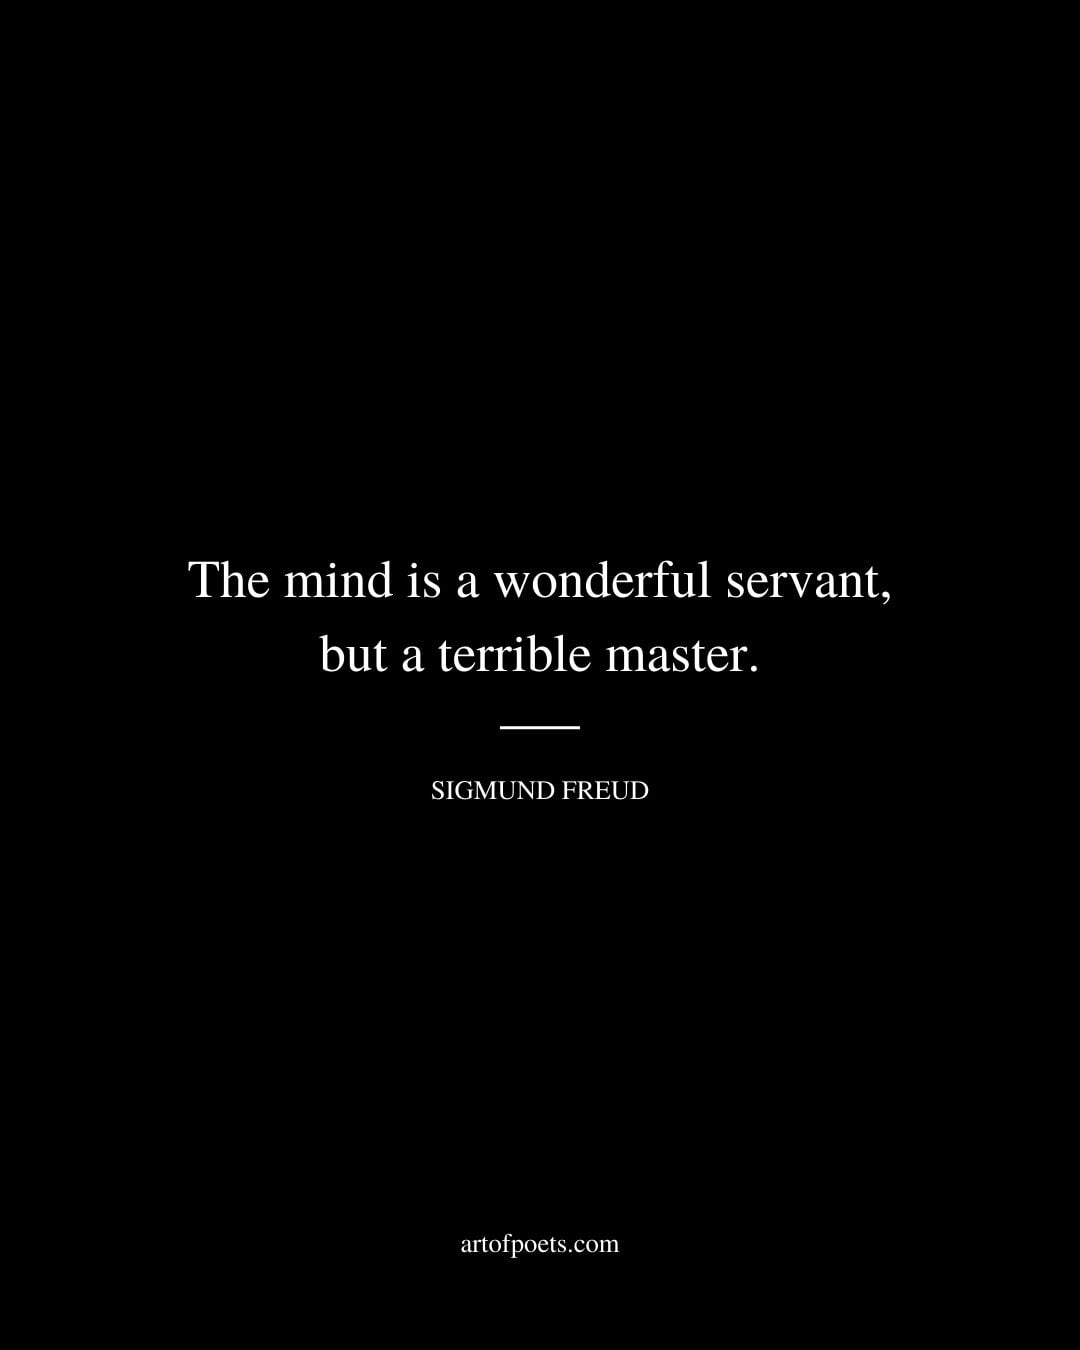 The mind is a wonderful servant but a terrible master